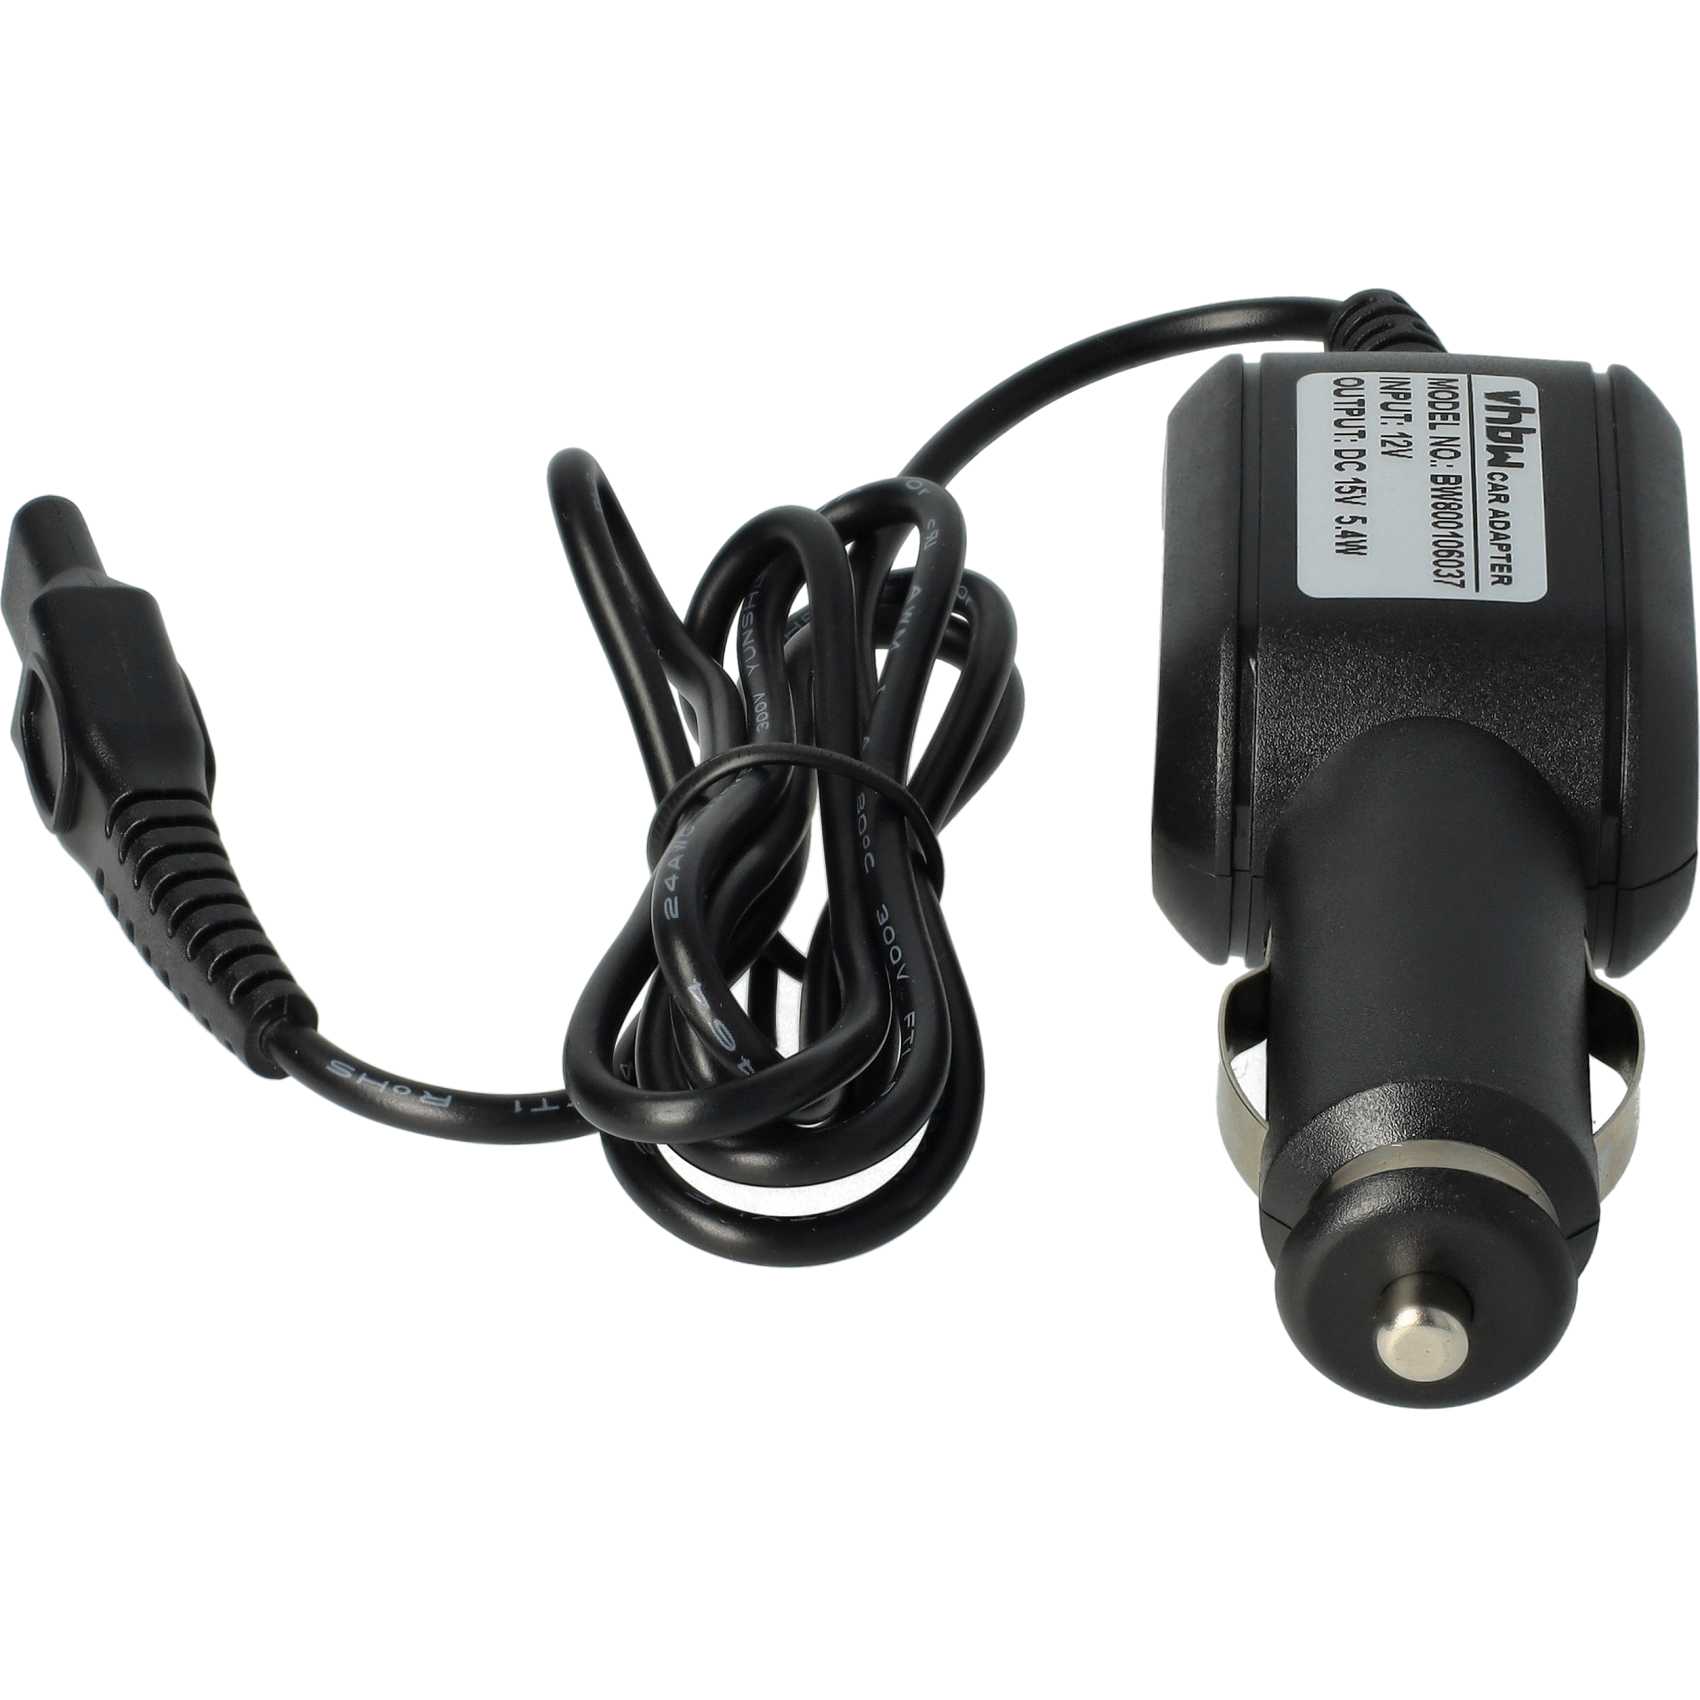 Vehicle Charger suitable for HS8020 Philips, Philips / Norelco HS8020 Shaver etc. - 12 V Car Charger